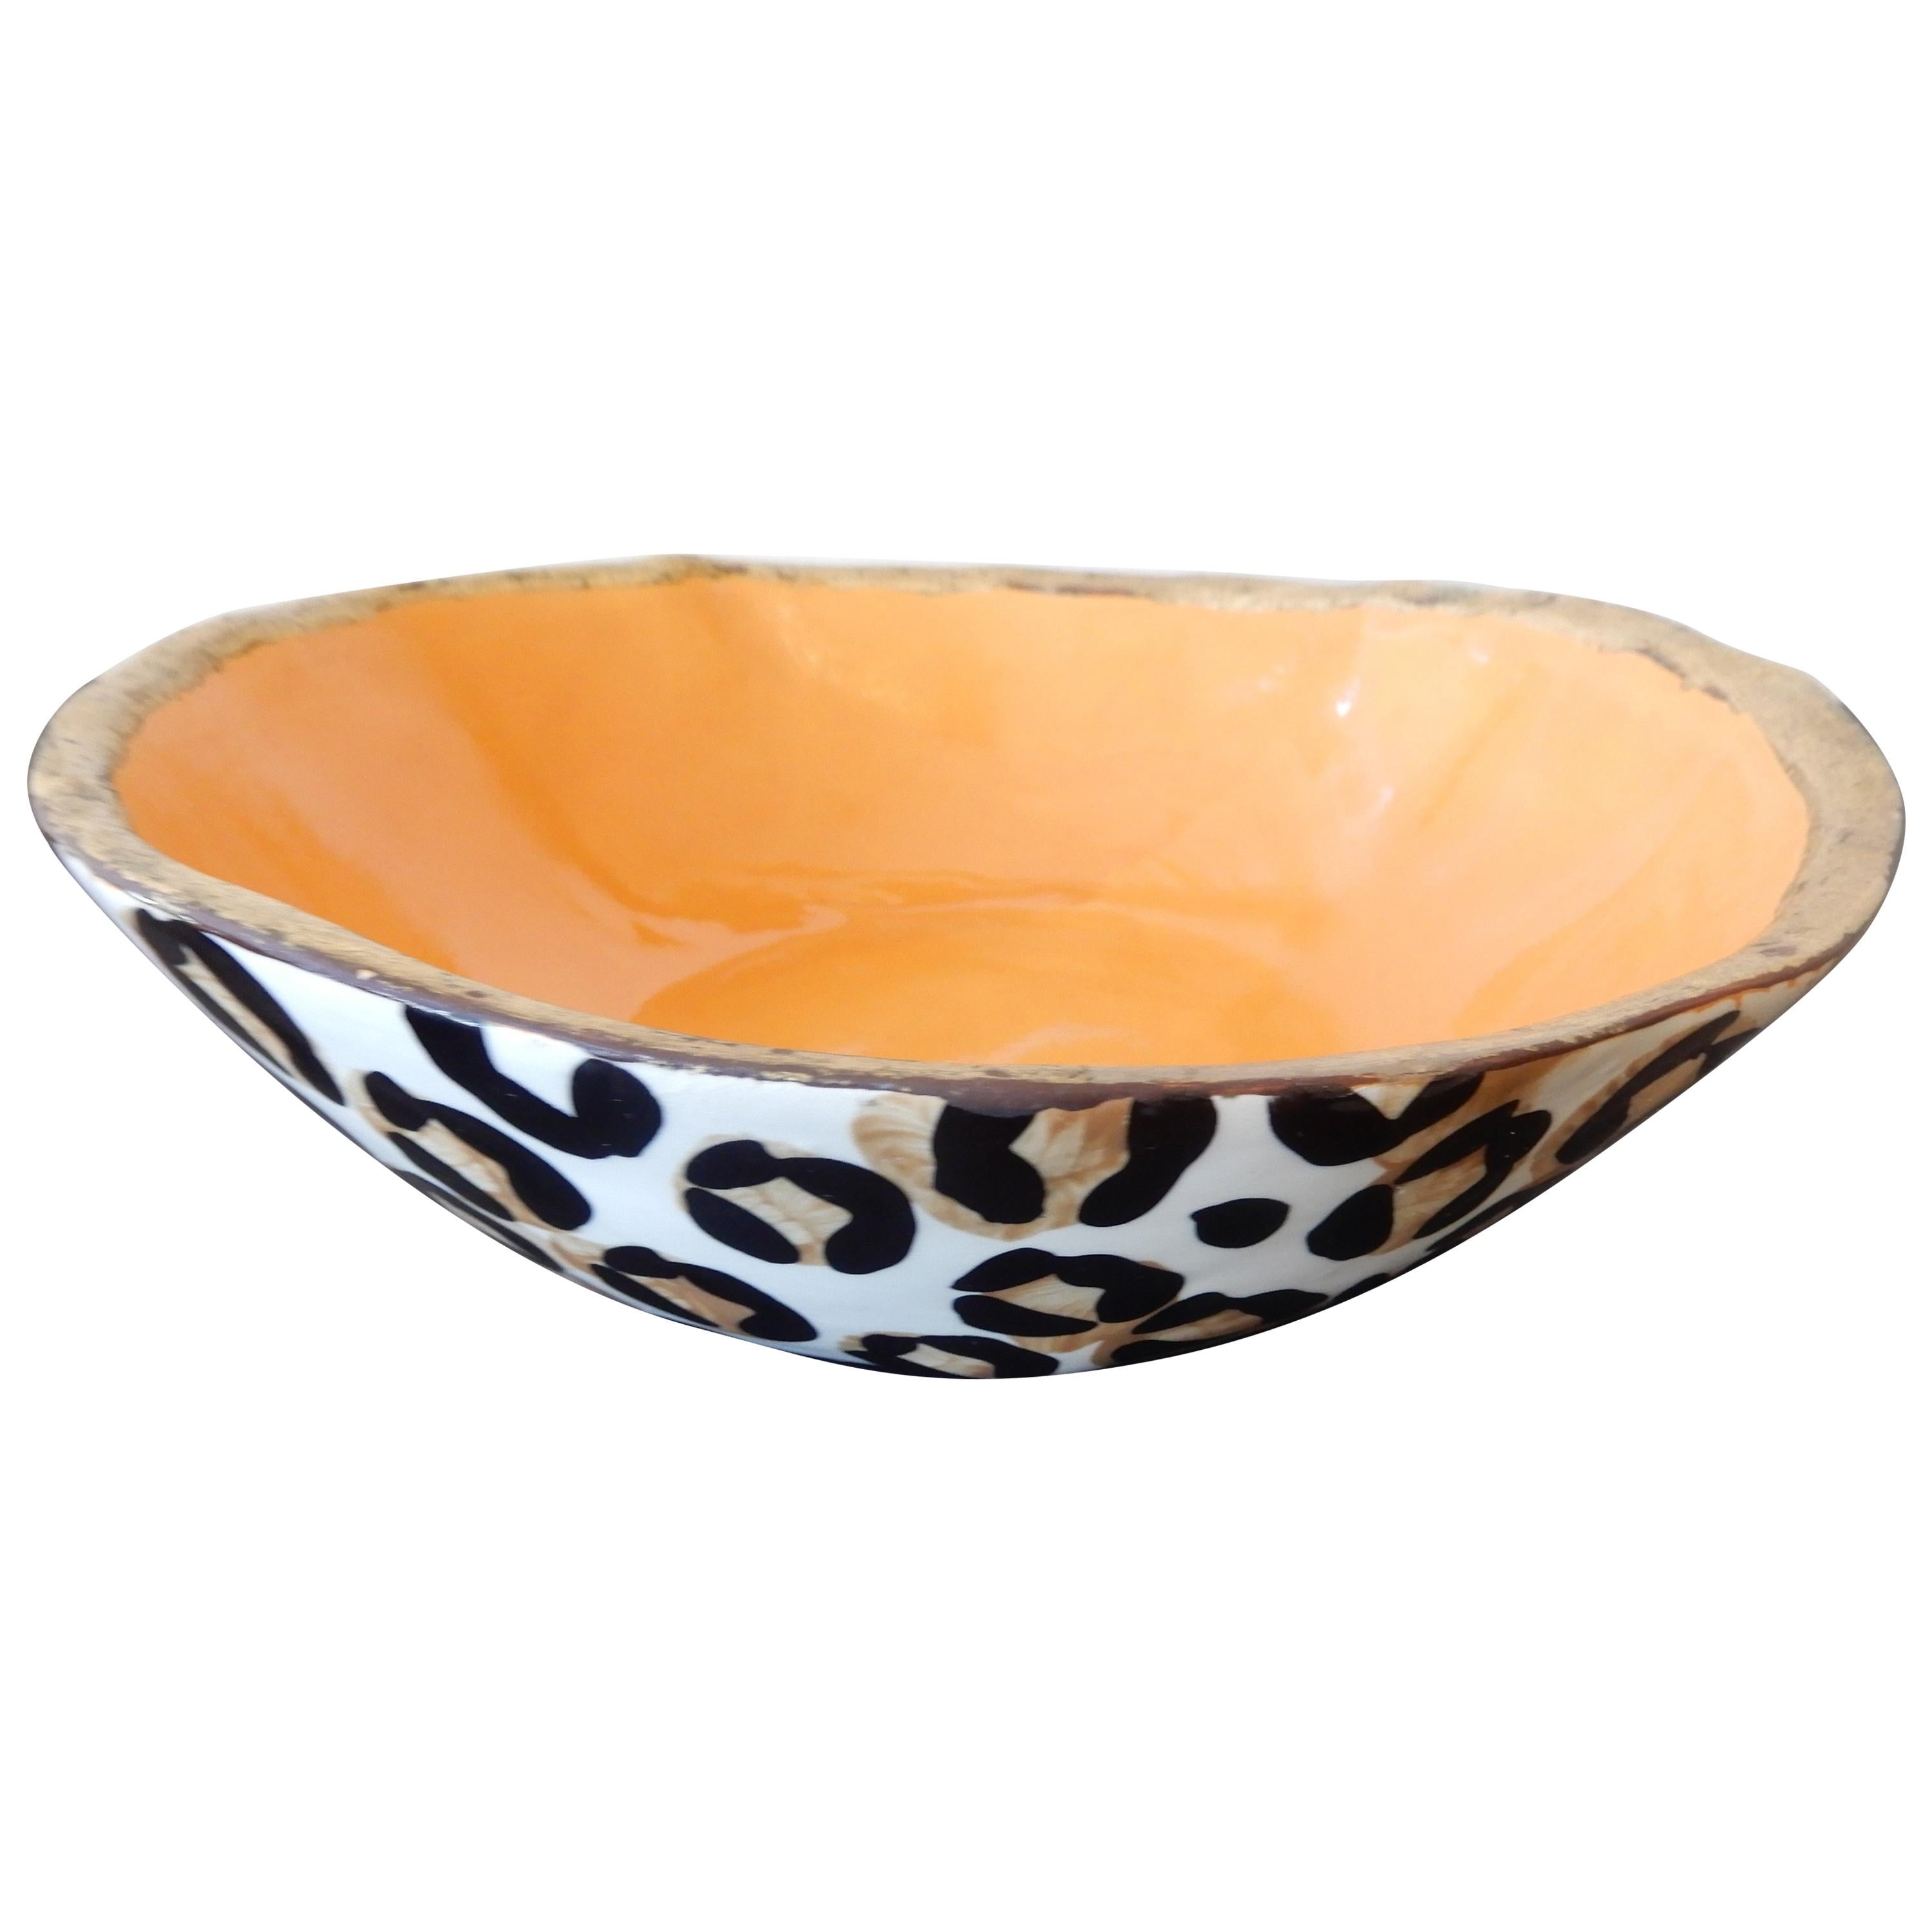 Leopard Bowl by Brenda Holzke from the B.Ware Malibu Collection, 1970s